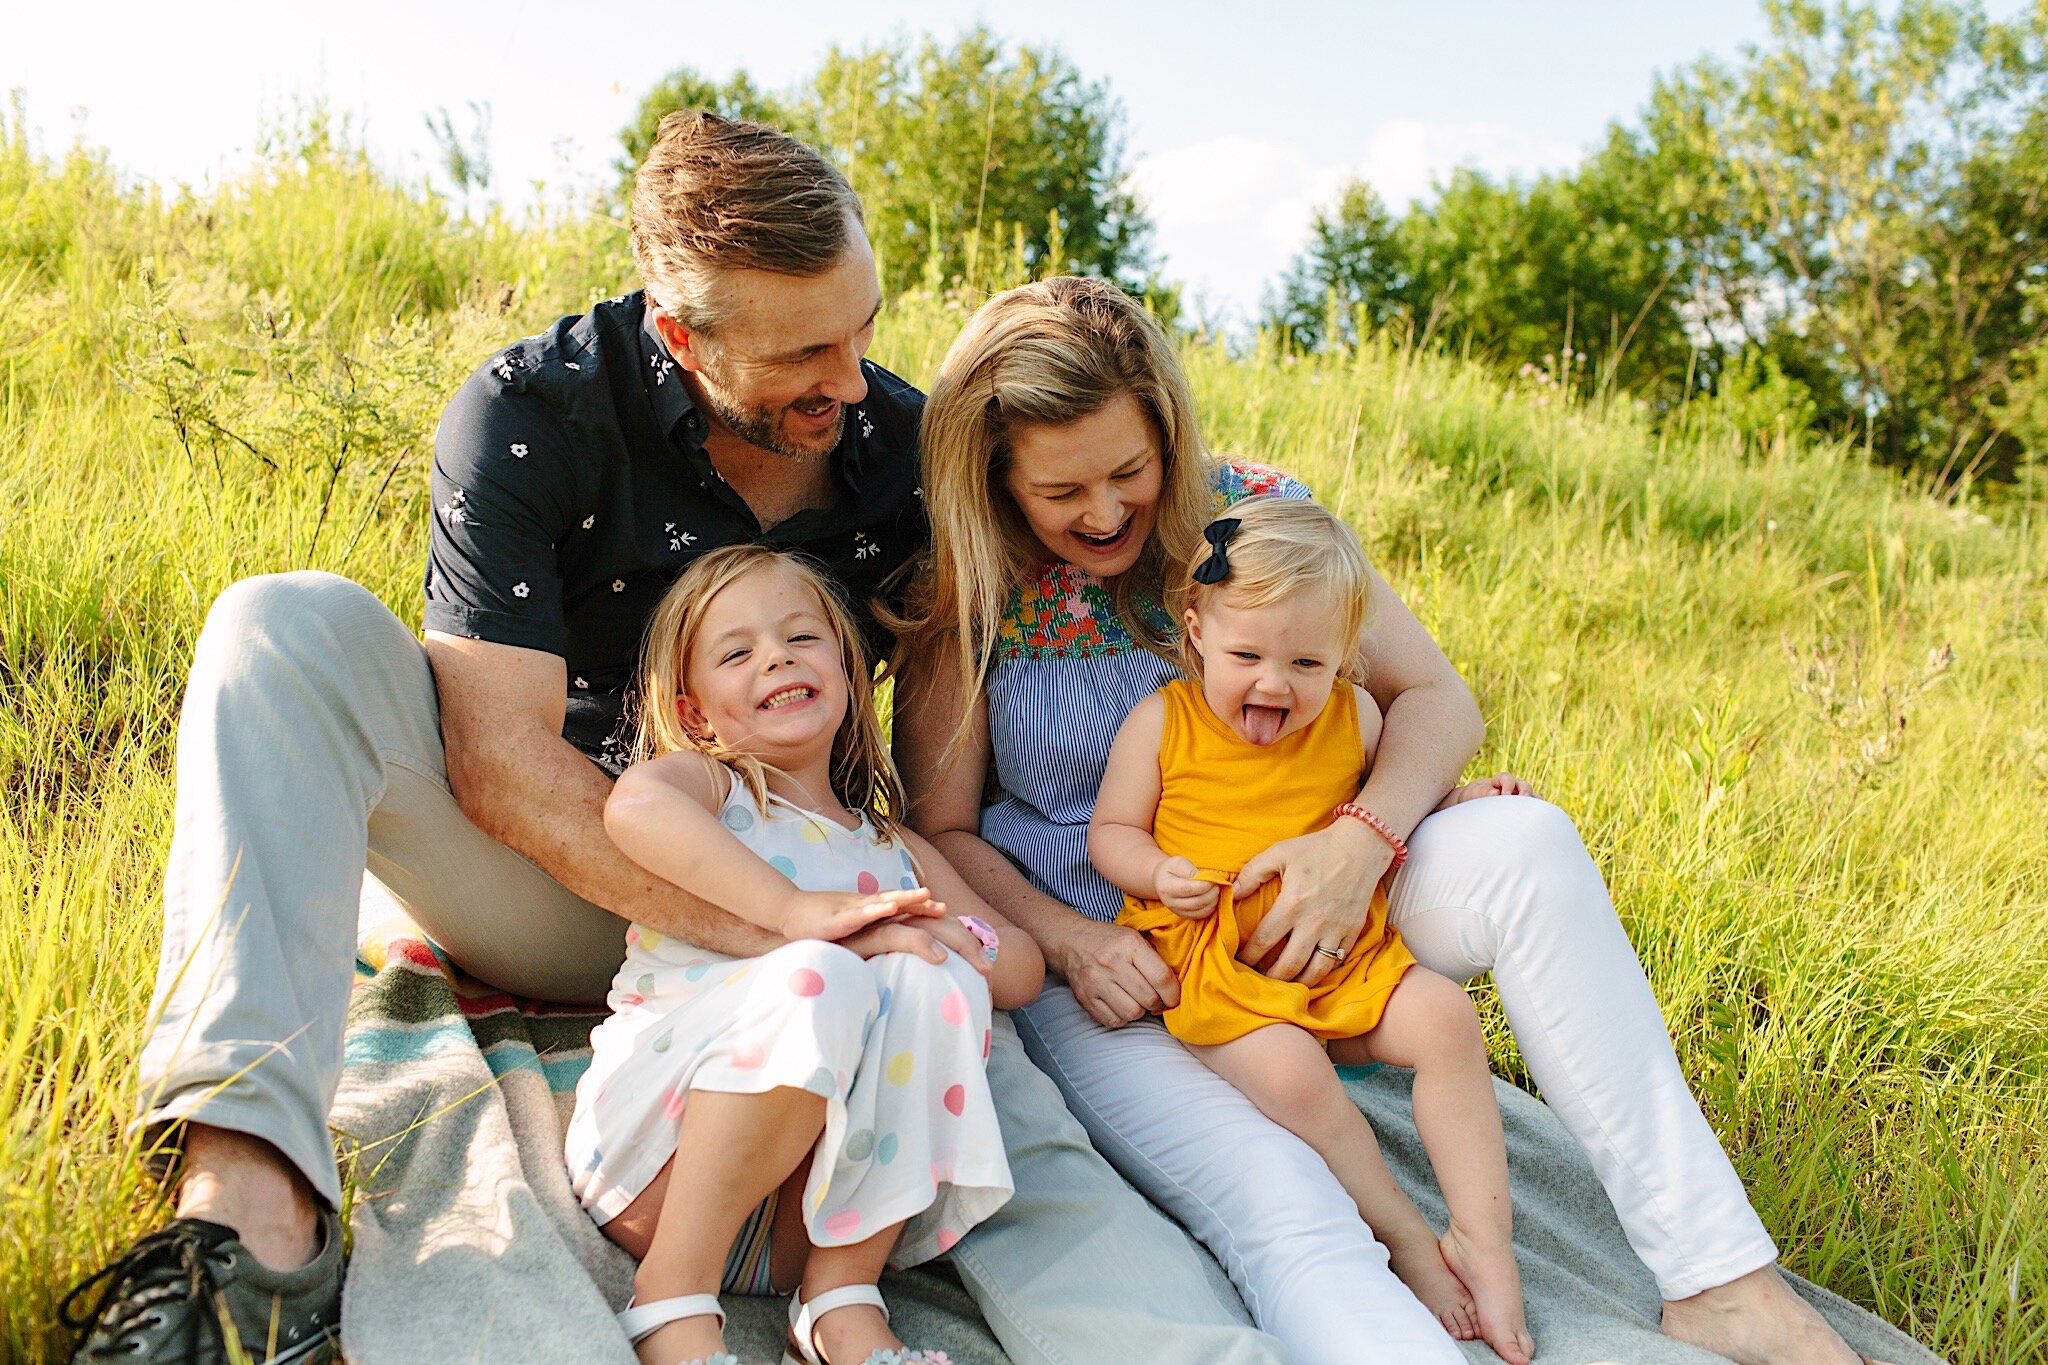 Family portrait photography in a grassy field in Minneapolis